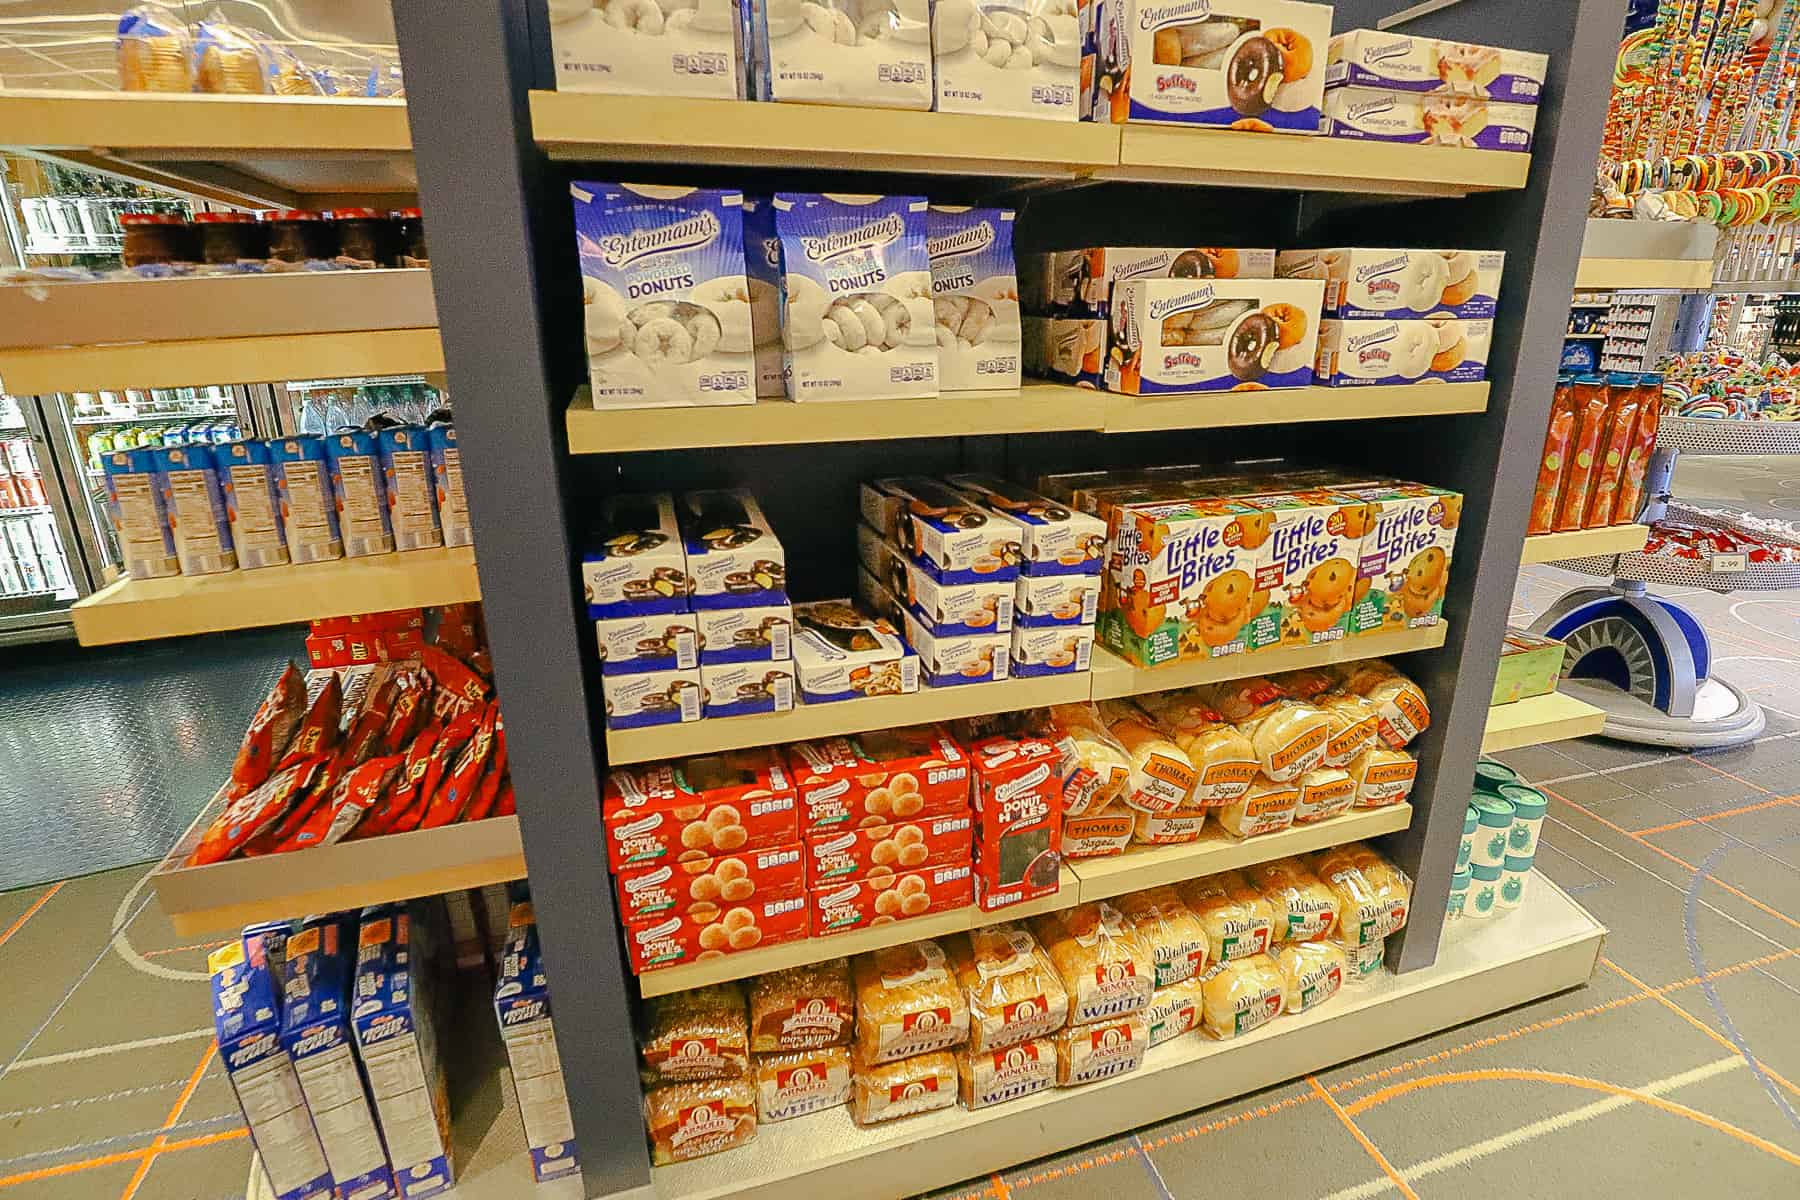 Entemann's products, muffins, bagels, and loaves of bread 